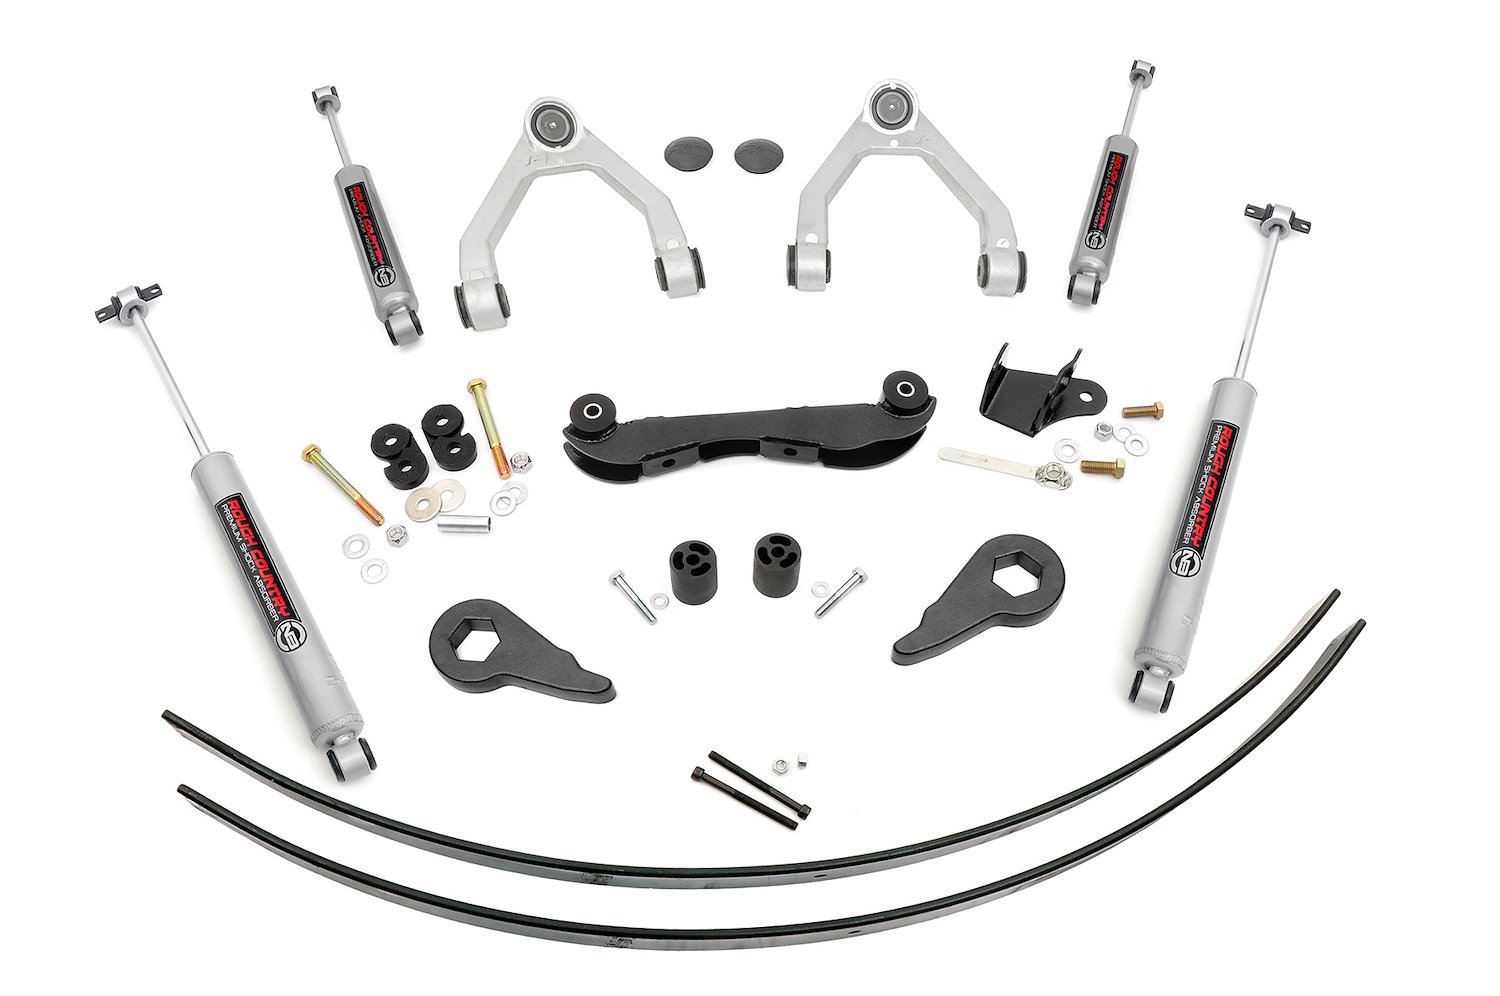 17030 2-3 in. Lift Suspension Lift Kit Fits Select 1988-1999 Chevrolet, GMC Models